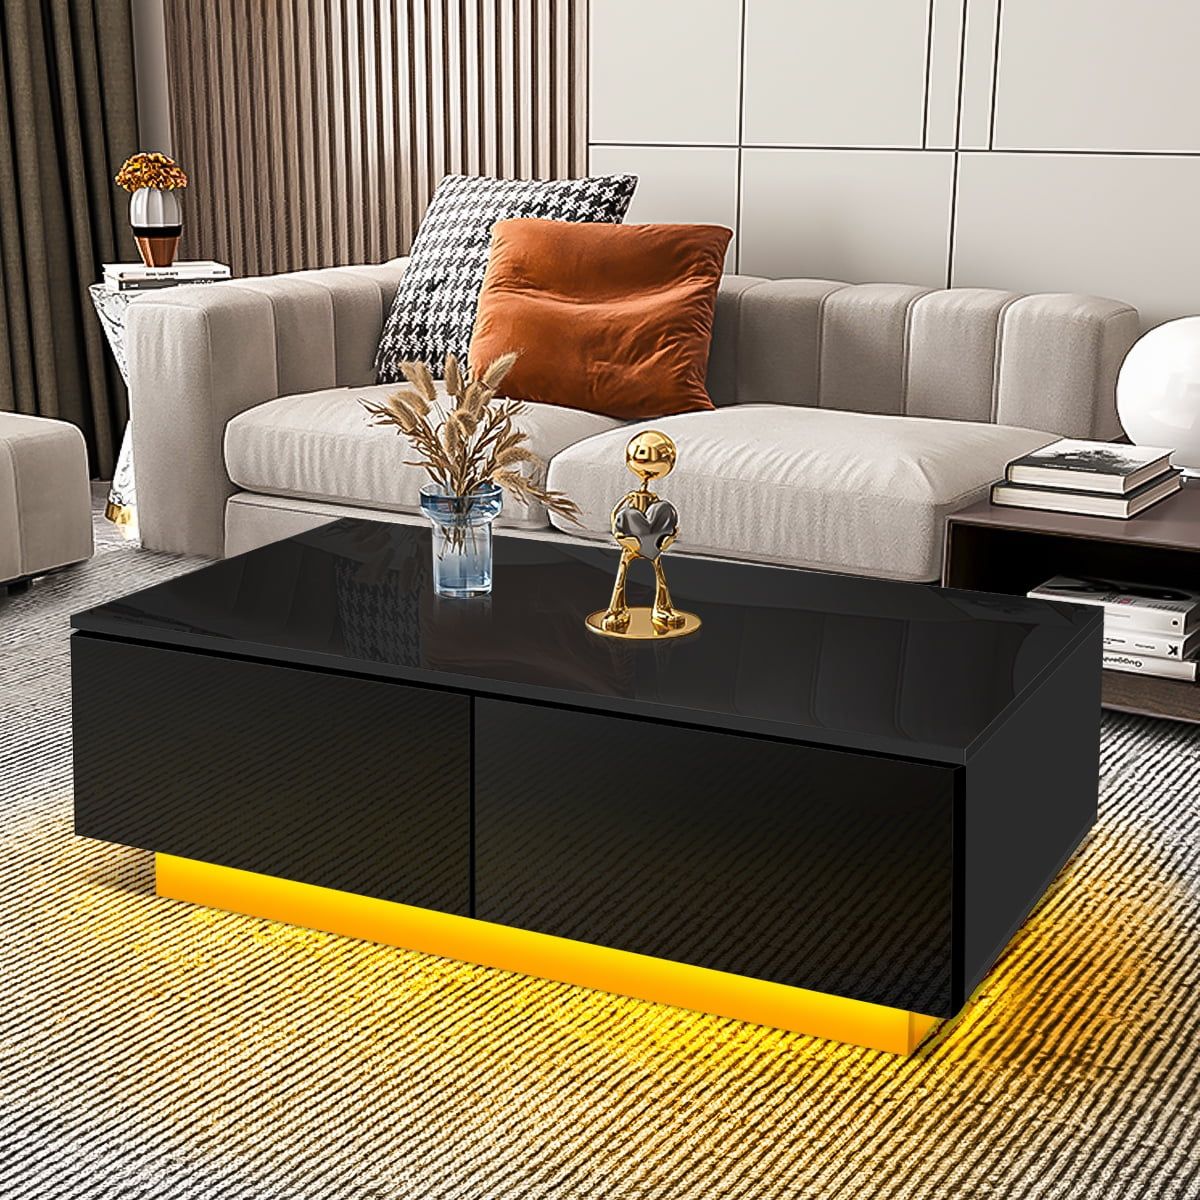 High Gloss Rectangle Coffee Table Led Cocktail Tables With 4 Storage Drawers  Modern Center Tea Table For Living Room – Walmart With Led Coffee Tables With 4 Drawers (View 11 of 15)